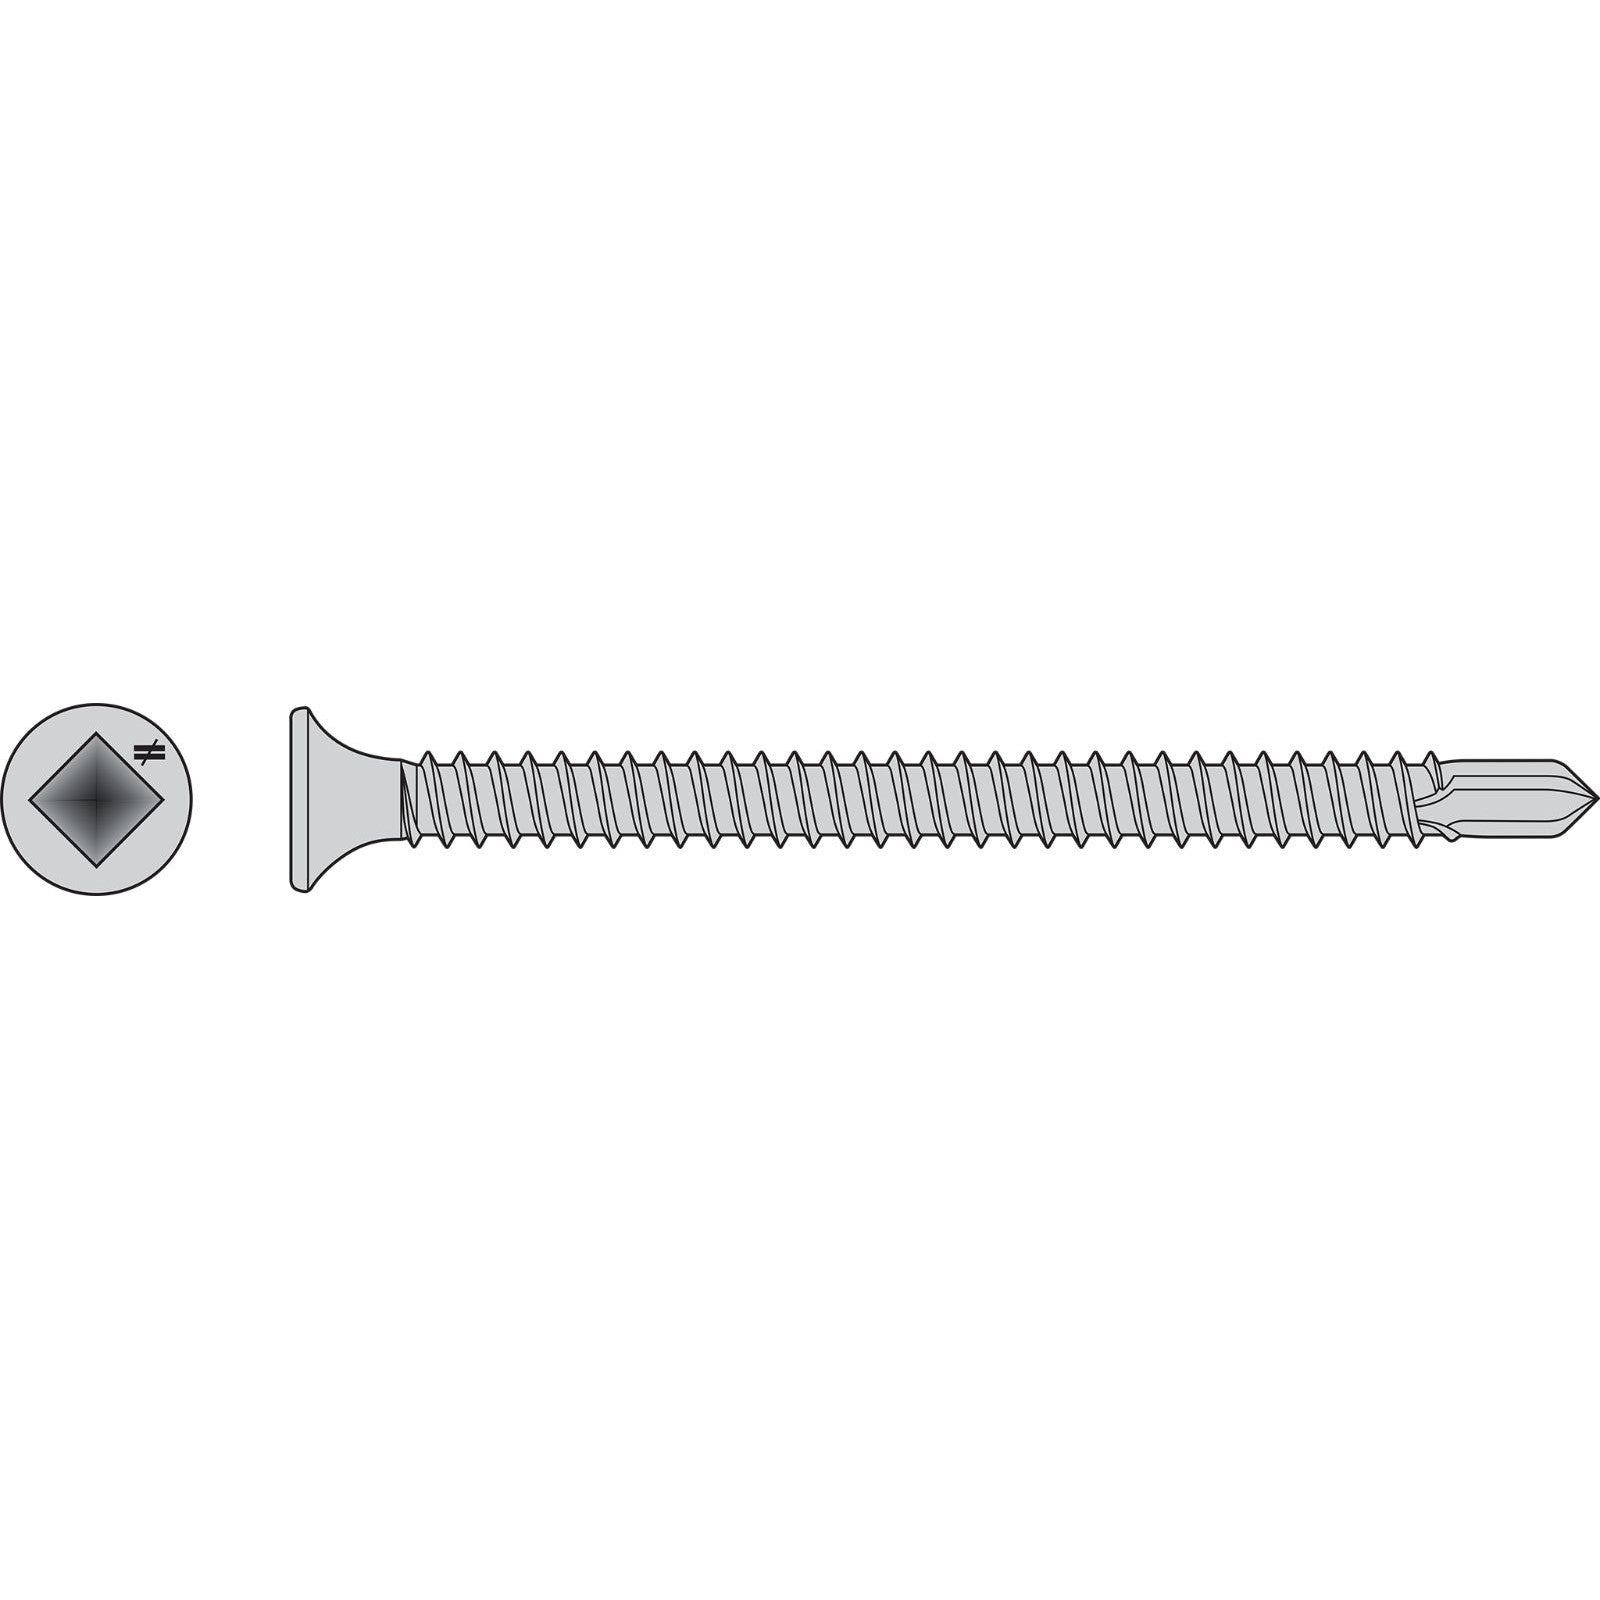 #10 x 312 inch Square Drive SelfDrilling BugleHead Screw 410 Stainless Steel Pkg 100